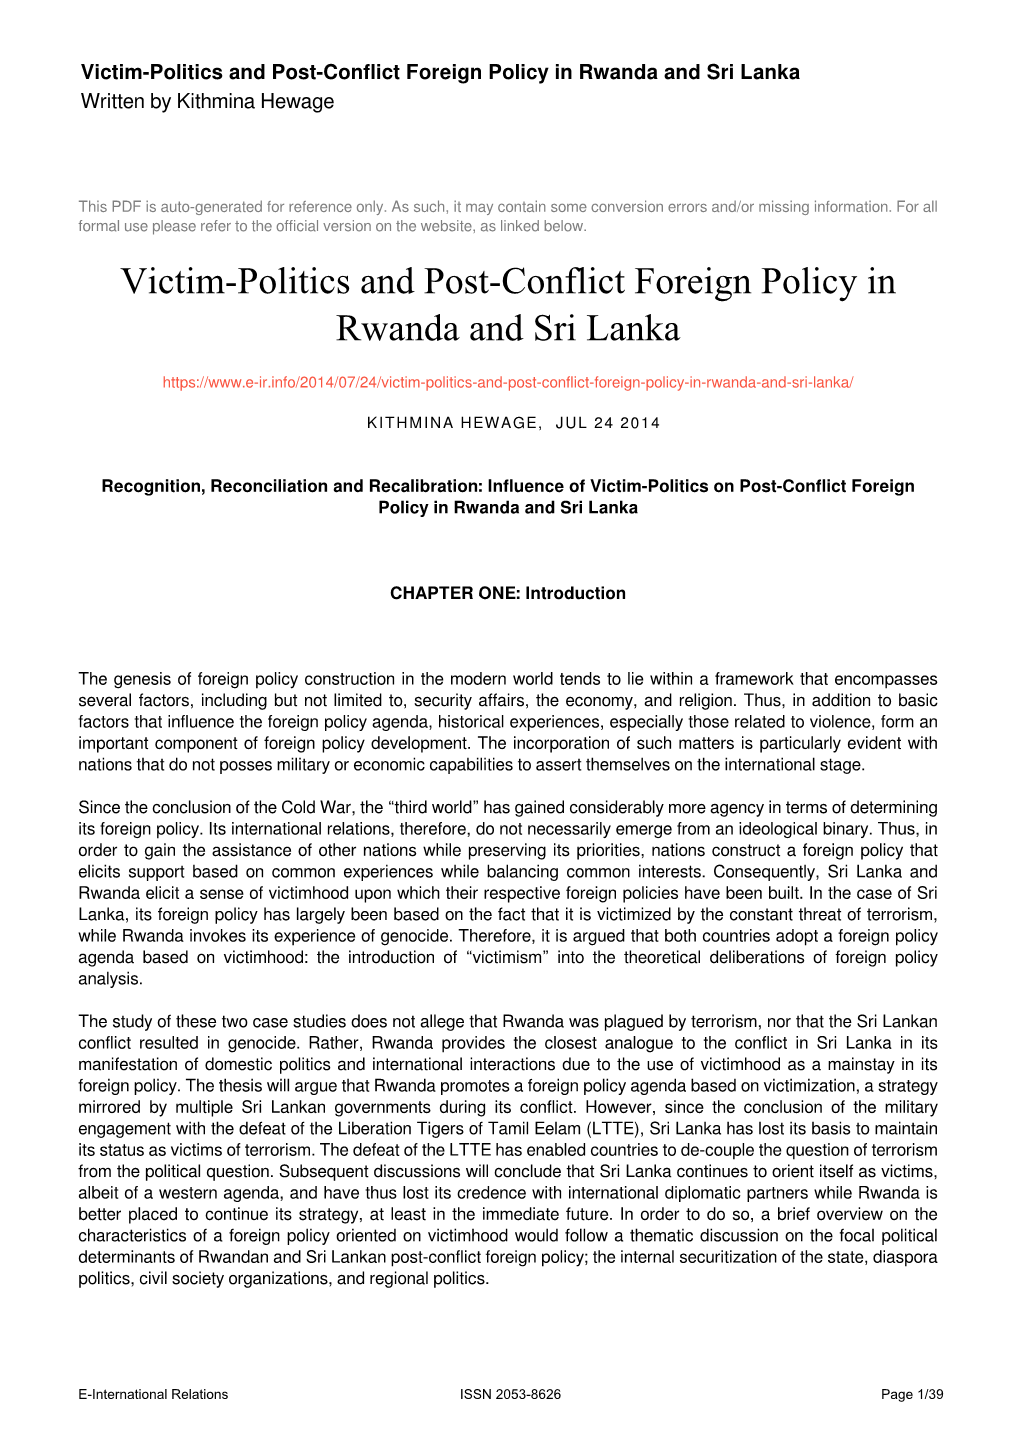 Victim-Politics and Post-Conflict Foreign Policy in Rwanda and Sri Lanka Written by Kithmina Hewage